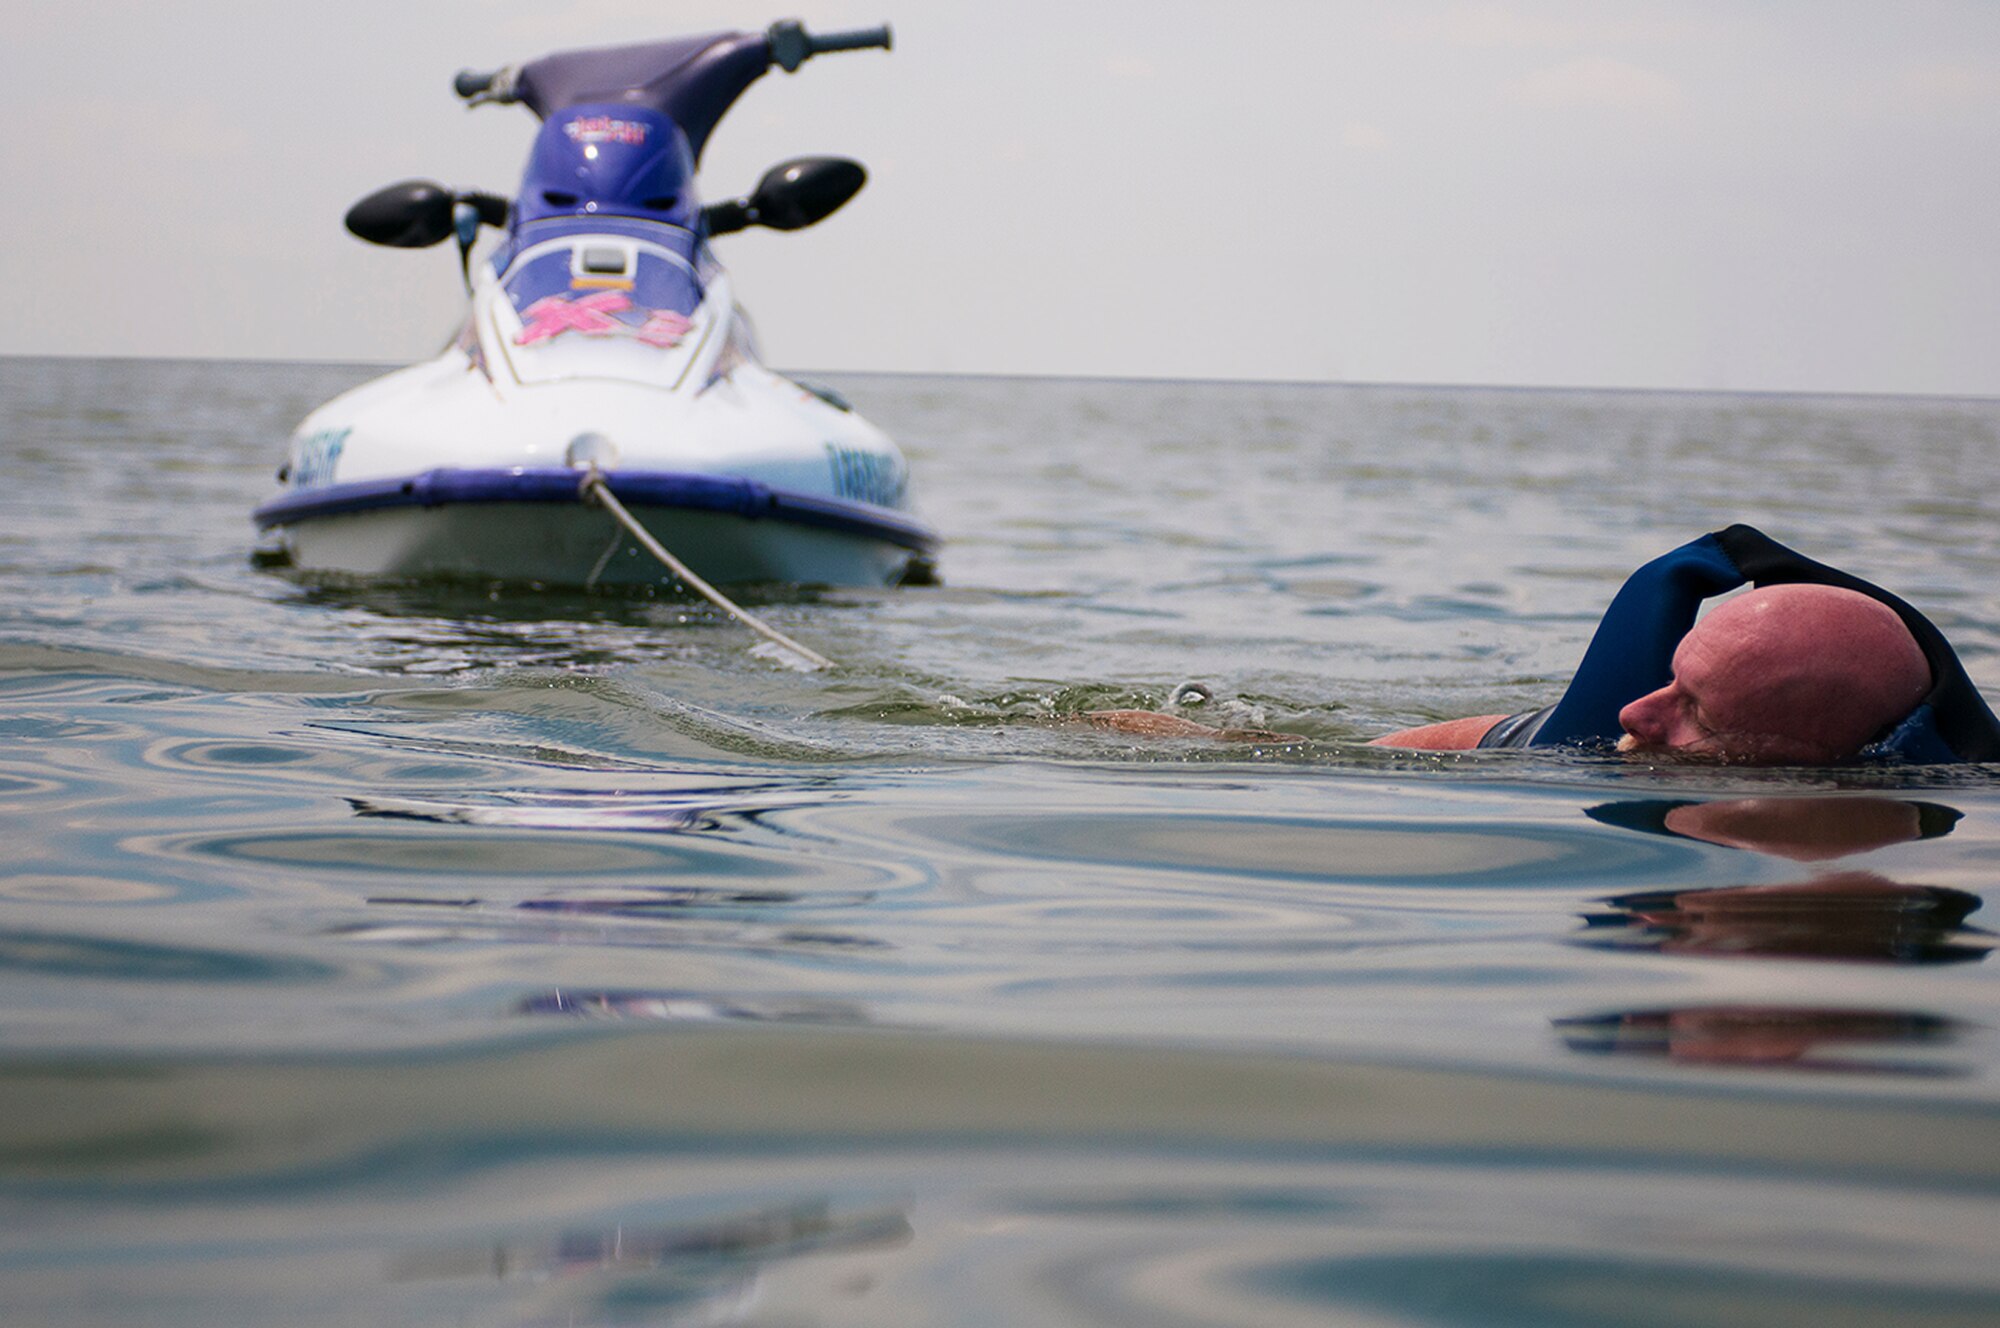 Miles from shore, Robert Spence had to make it to land by swimming — with his broken jet ski in tow. (U.S. Air photo by Tech. Sgt. Sarayuth Pinthong/Released)